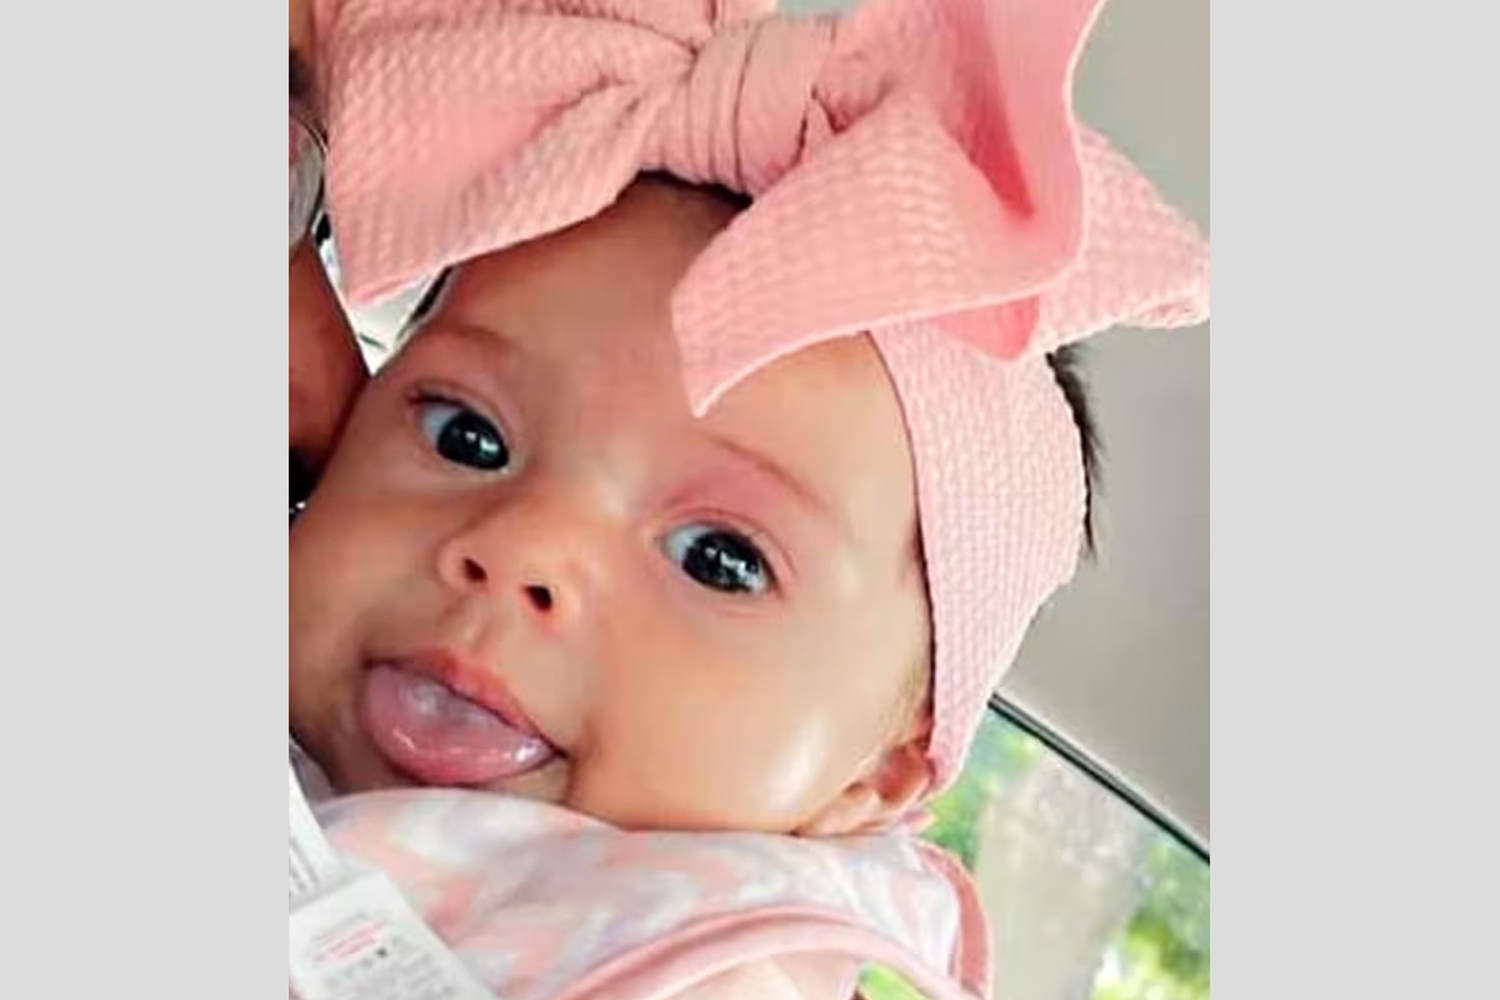 10-month-old girl abducted from New Mexico park found safe after mother, another woman found dead